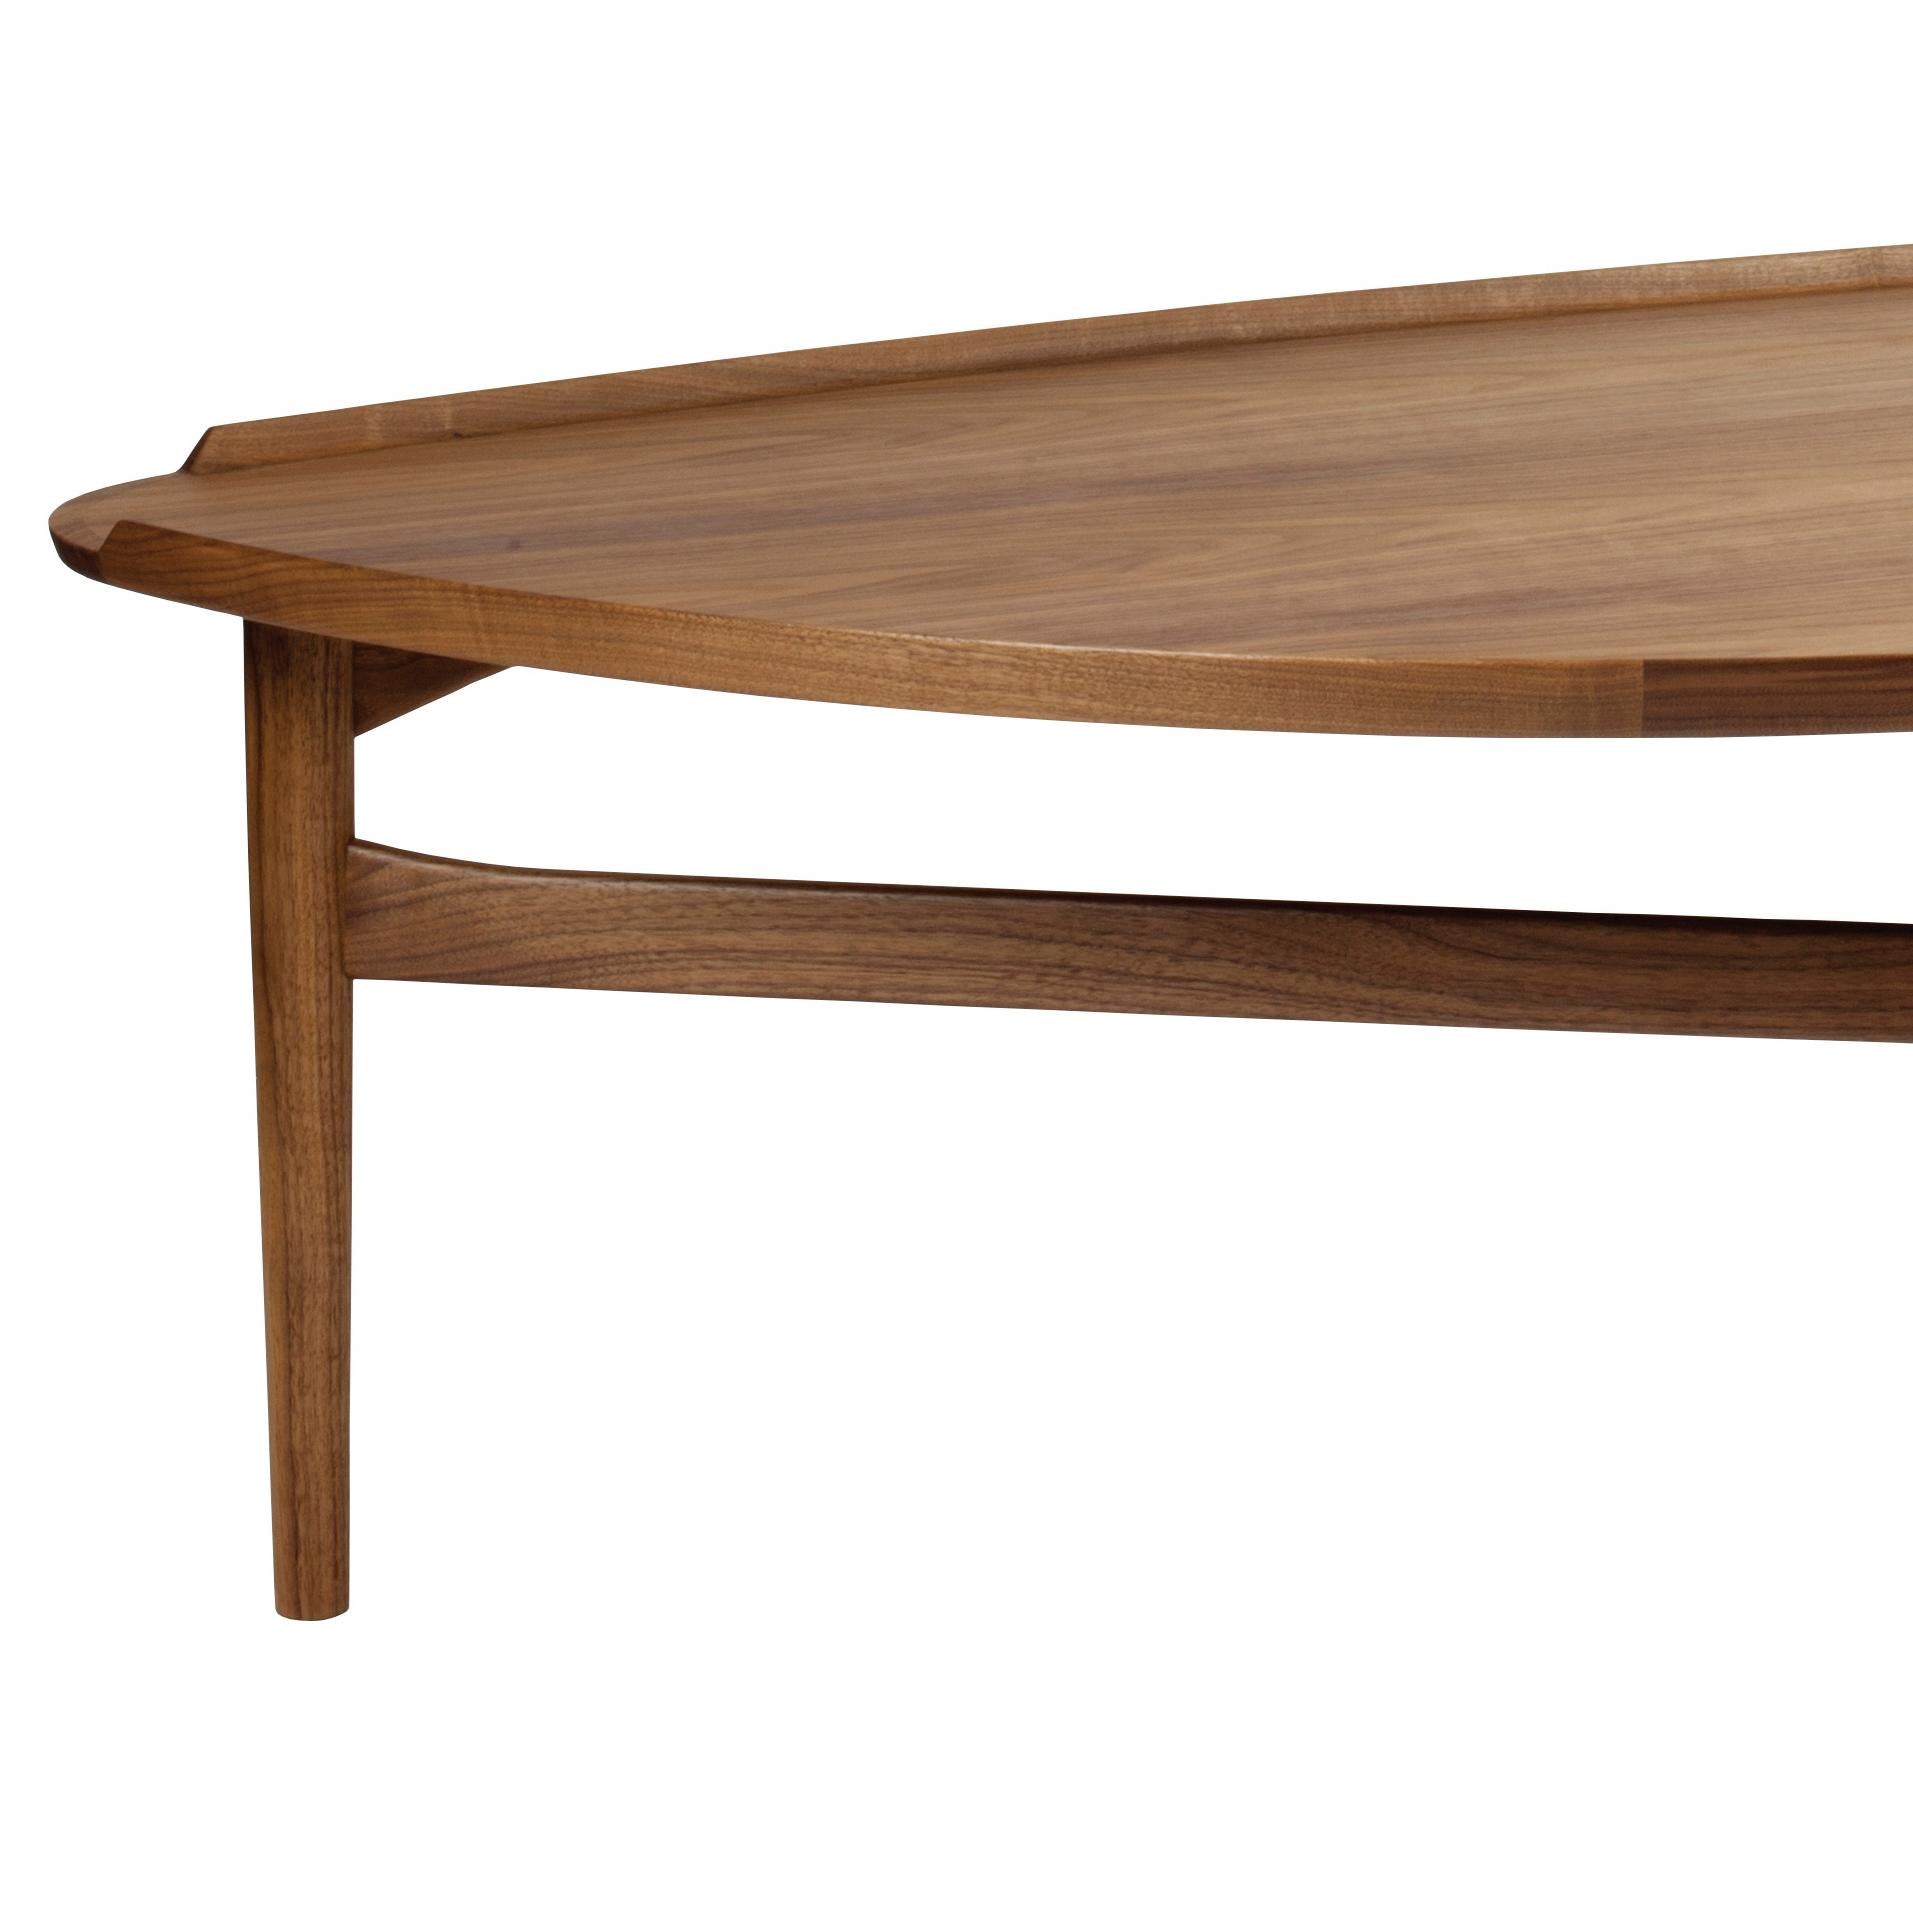 Table designed by Finn Juhl in 1951, relaunched in 2009.
Manufactured by House of Finn Juhl in Denmark.

Finn Juhl’s cocktail table was designed for Baker Furniture in the United States to match the sculptural baker sofa.

The economy was